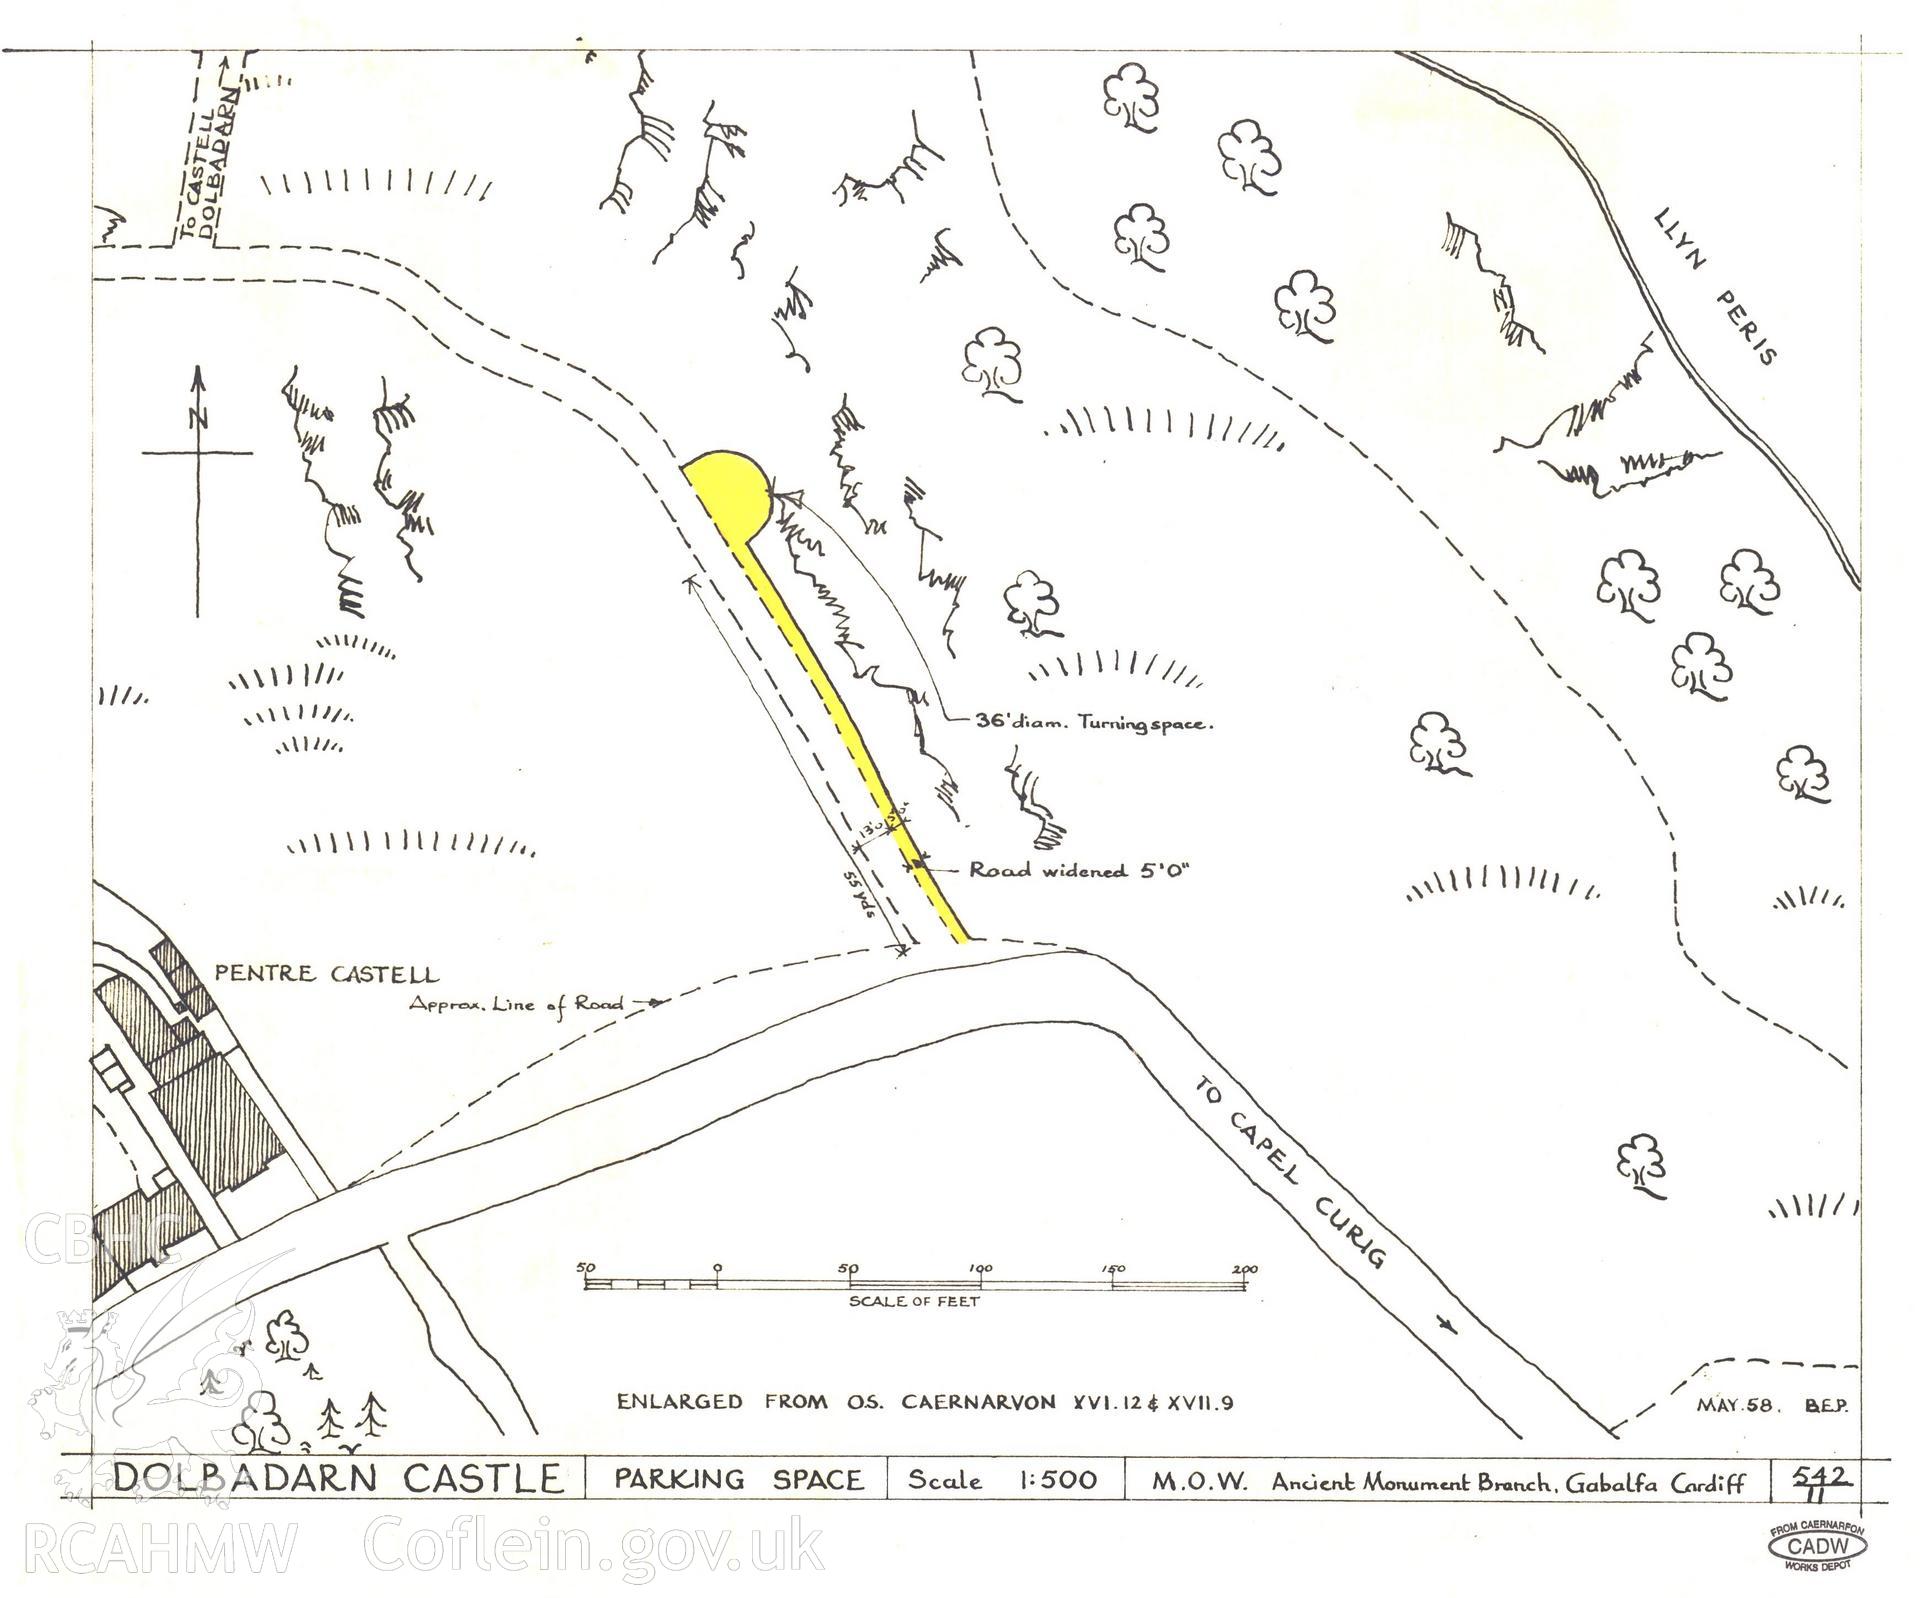 Cadw guardianship monument drawing of Dolbadarn Castle. Parking (and turning space). Cadw Ref. No:542/11. Scale 1:500.